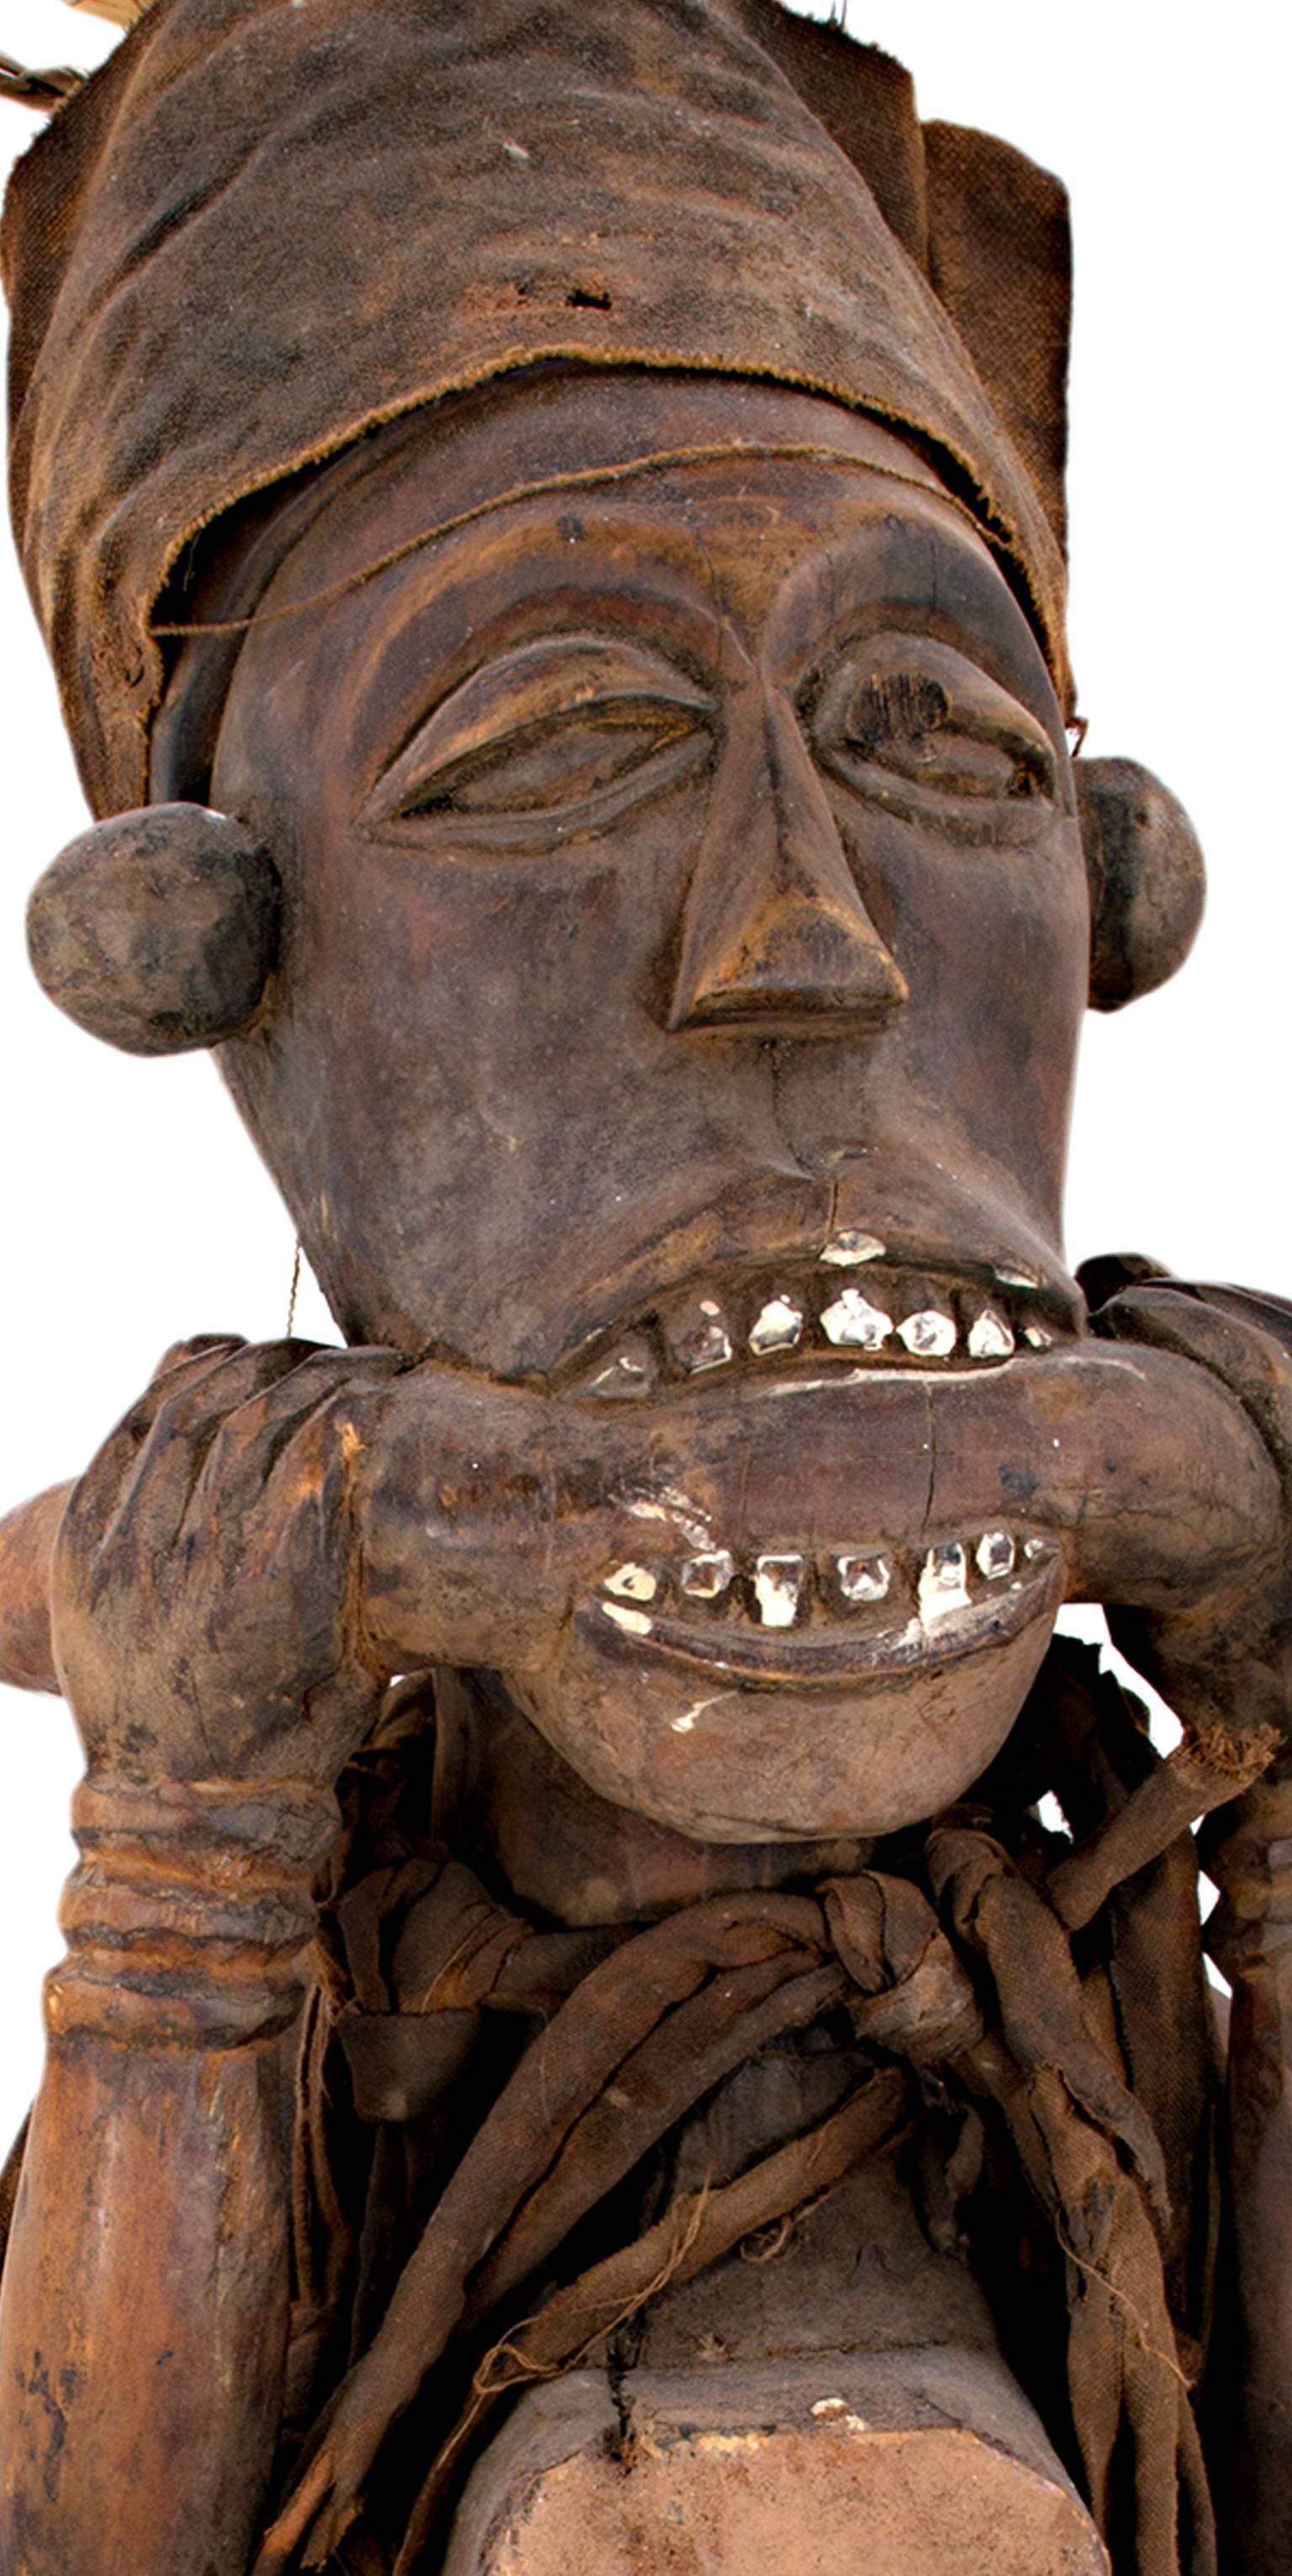 This wood statue, used as a fetish, was created by an unknown Bacongo artist in Zaire. The Kongo people (also Bakongo) are a Bantu ethnic group primarily defined as the speakers of Kikongo (Kongo languages).

24